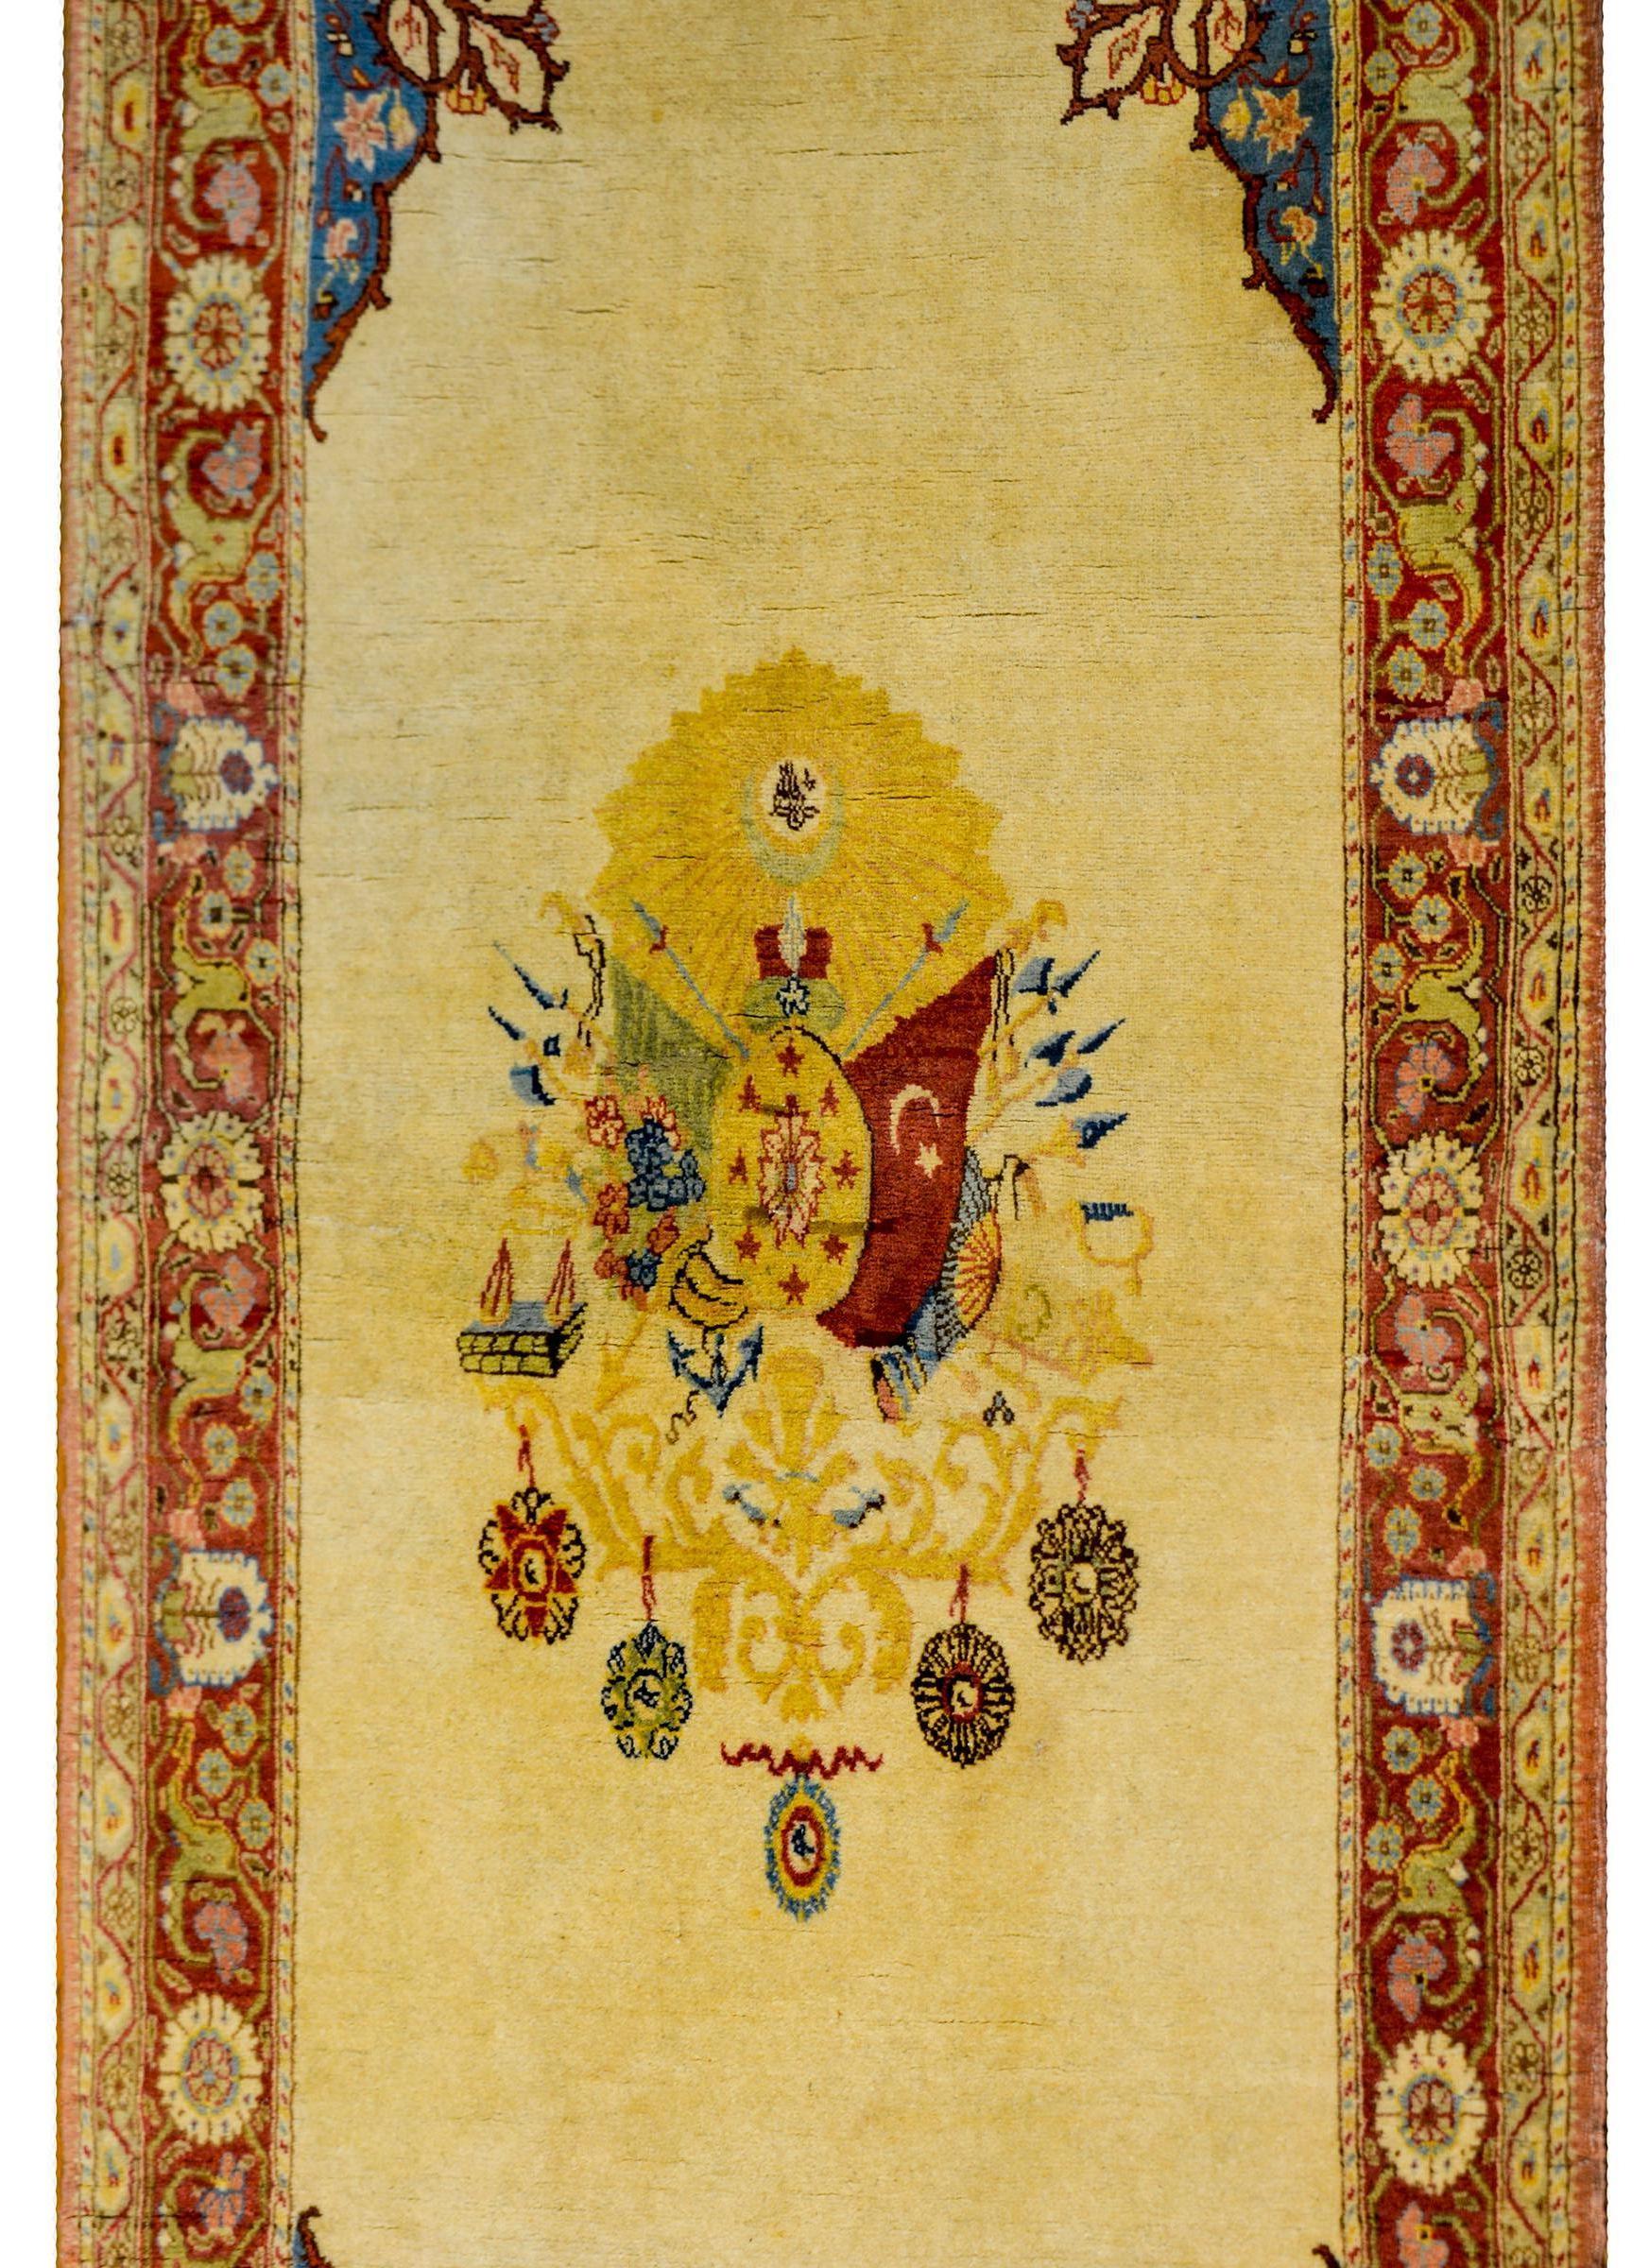 A rare 20th century Turkish Hereke rug with a gorgeous pale yellow field with a large central coat of arms of the Ottoman Empire. The emblem features an ornate cartouche surrounded by various elements of the state including two flags. The red flag